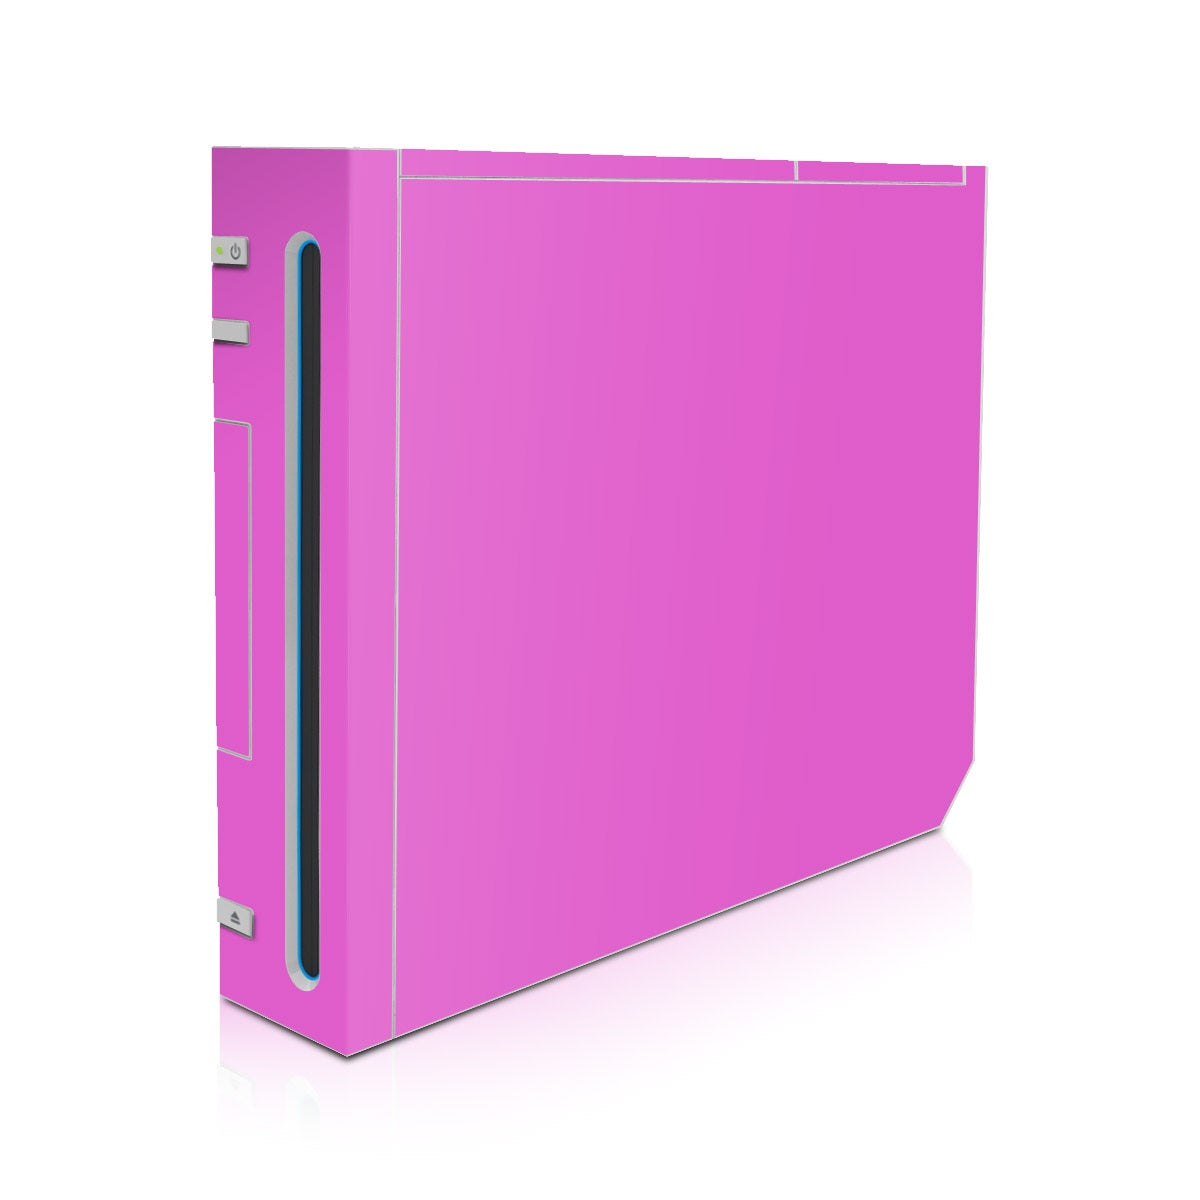 Solid State Vibrant Pink - Nintendo Wii Skin